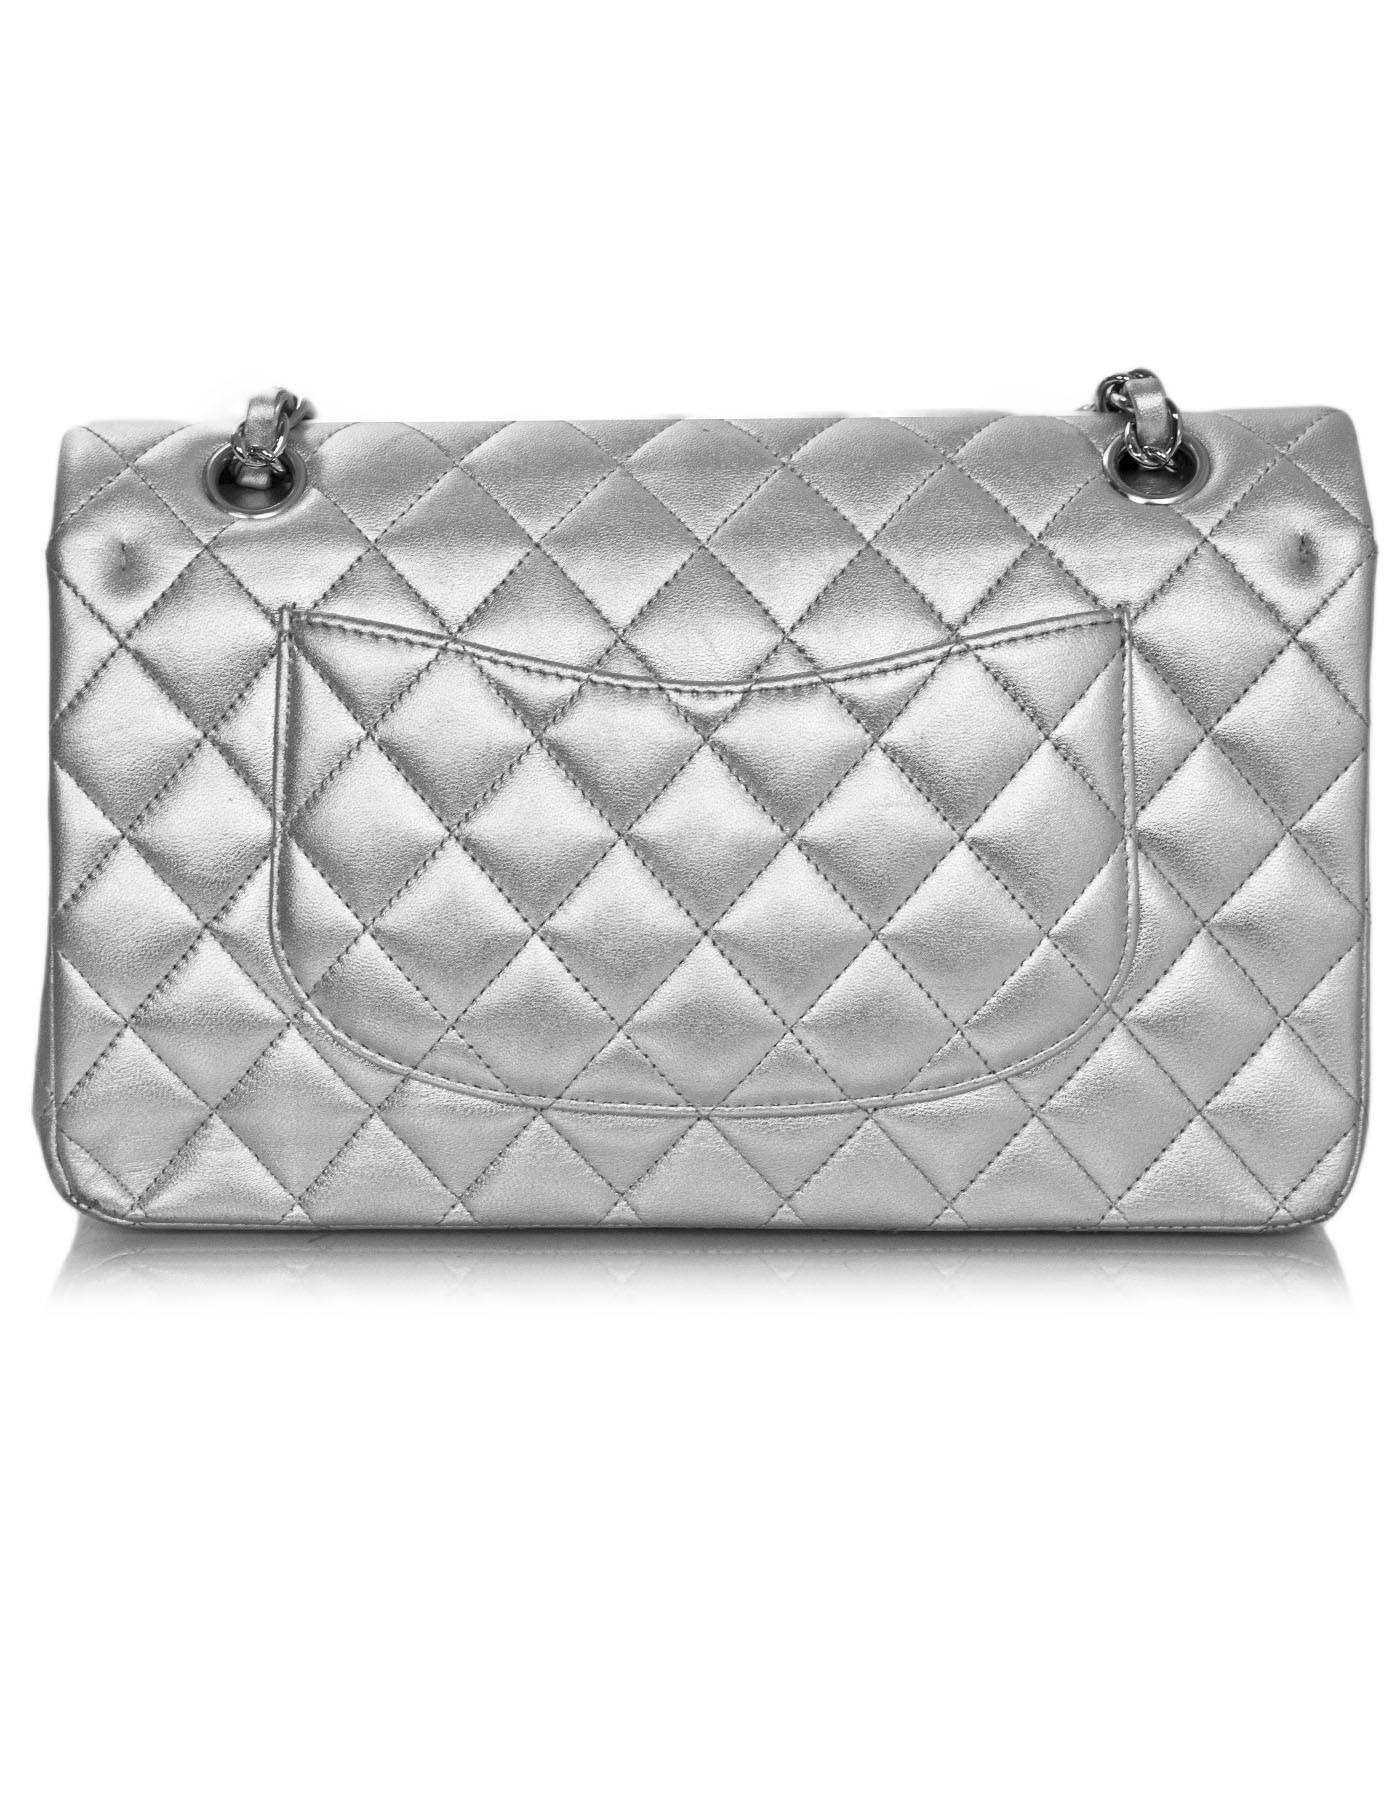 Chanel Silver Quilted Lambskin 10" Medium Double Flap Classic Bag

Made In: France
Year of Production: 2010-2011
Color: Silver
Hardware: Silvertone
Materials: Lambskin, metal
Lining: Silver leather
Closure/opening: Flap top with CC twist